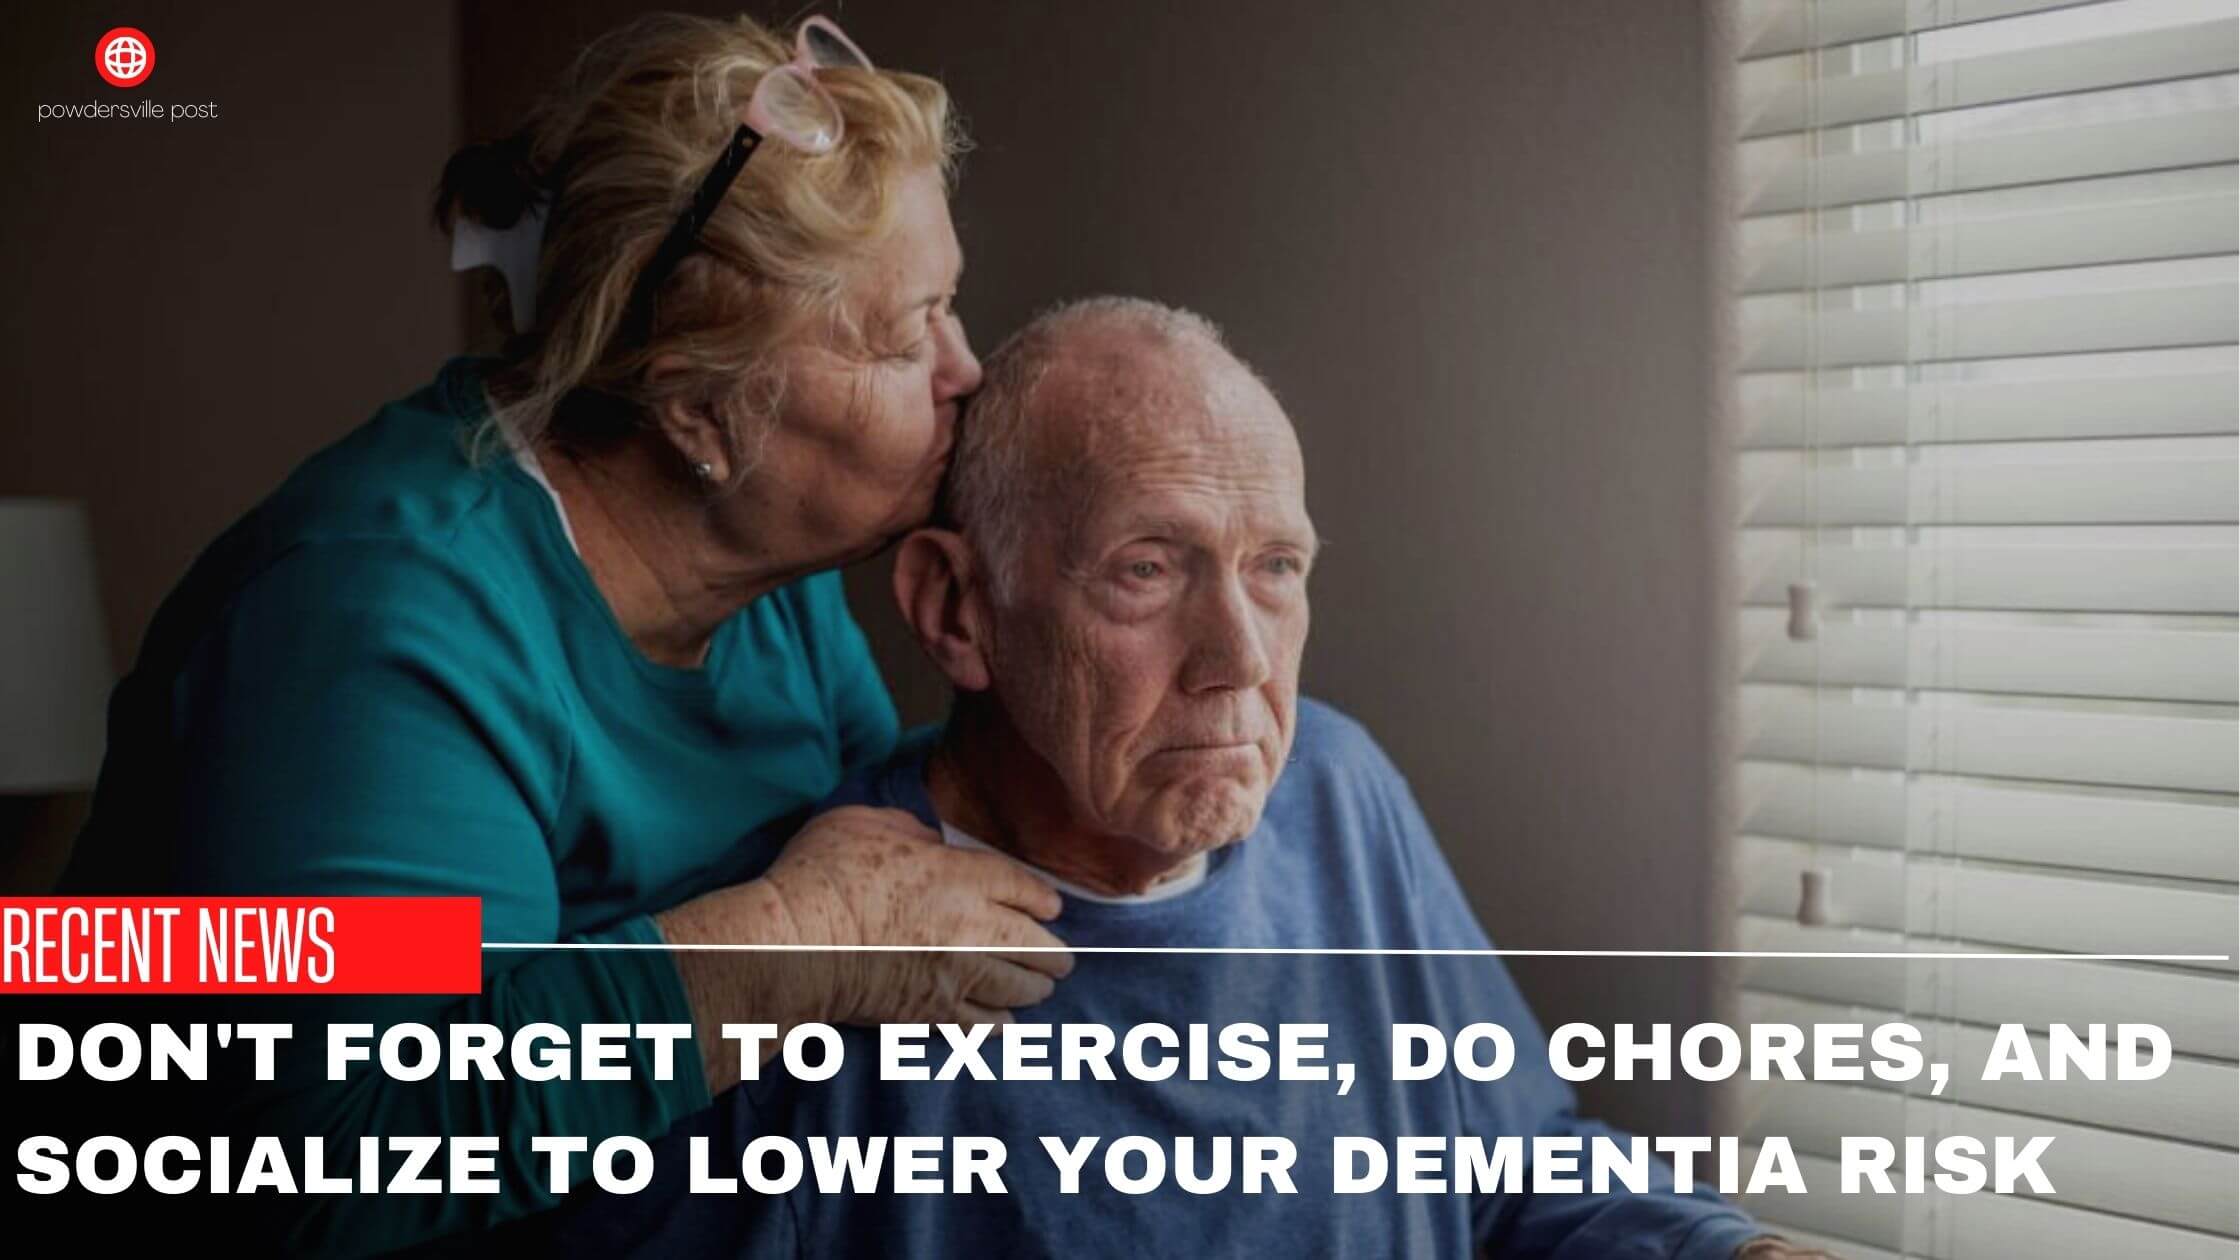 Don't Forget To Exercise Do Chores And Socialize To Lower Your Dementia RiskDon't Forget To Exercise Do Chores And Socialize To Lower Your Dementia RiskDon't Forget To Exercise Do Chores And Socialize To Lower Your Dementia Risk